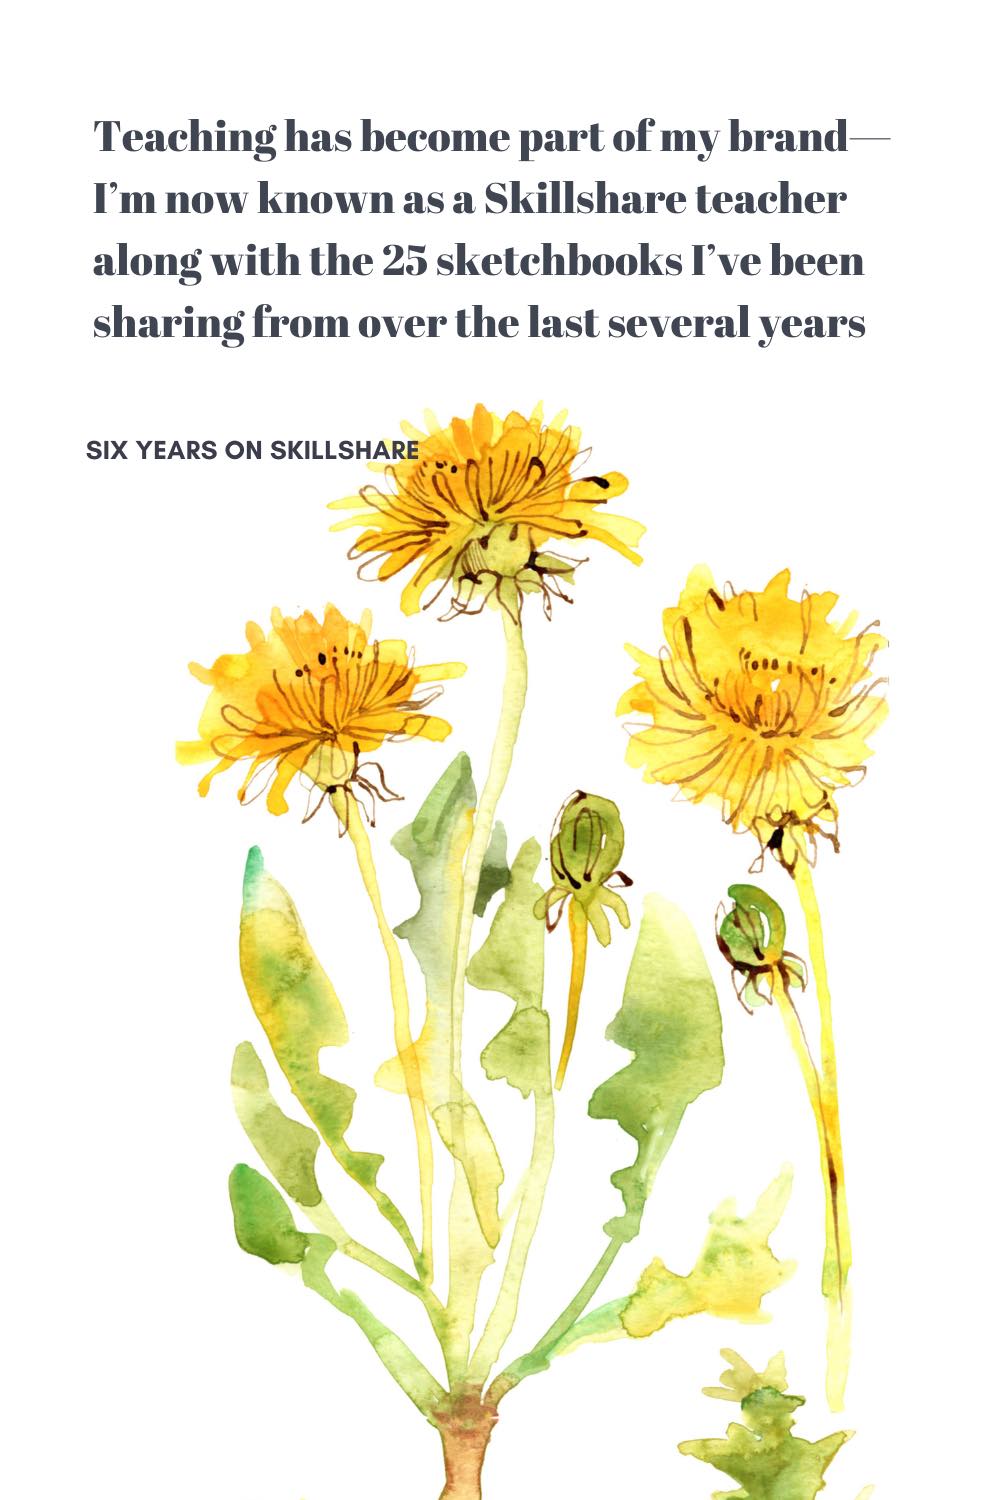 Watercolor illustration of a dandelion plat with three open, yellow dandelions, and two closed buds. The illustration says, "Six years on Skillshare."